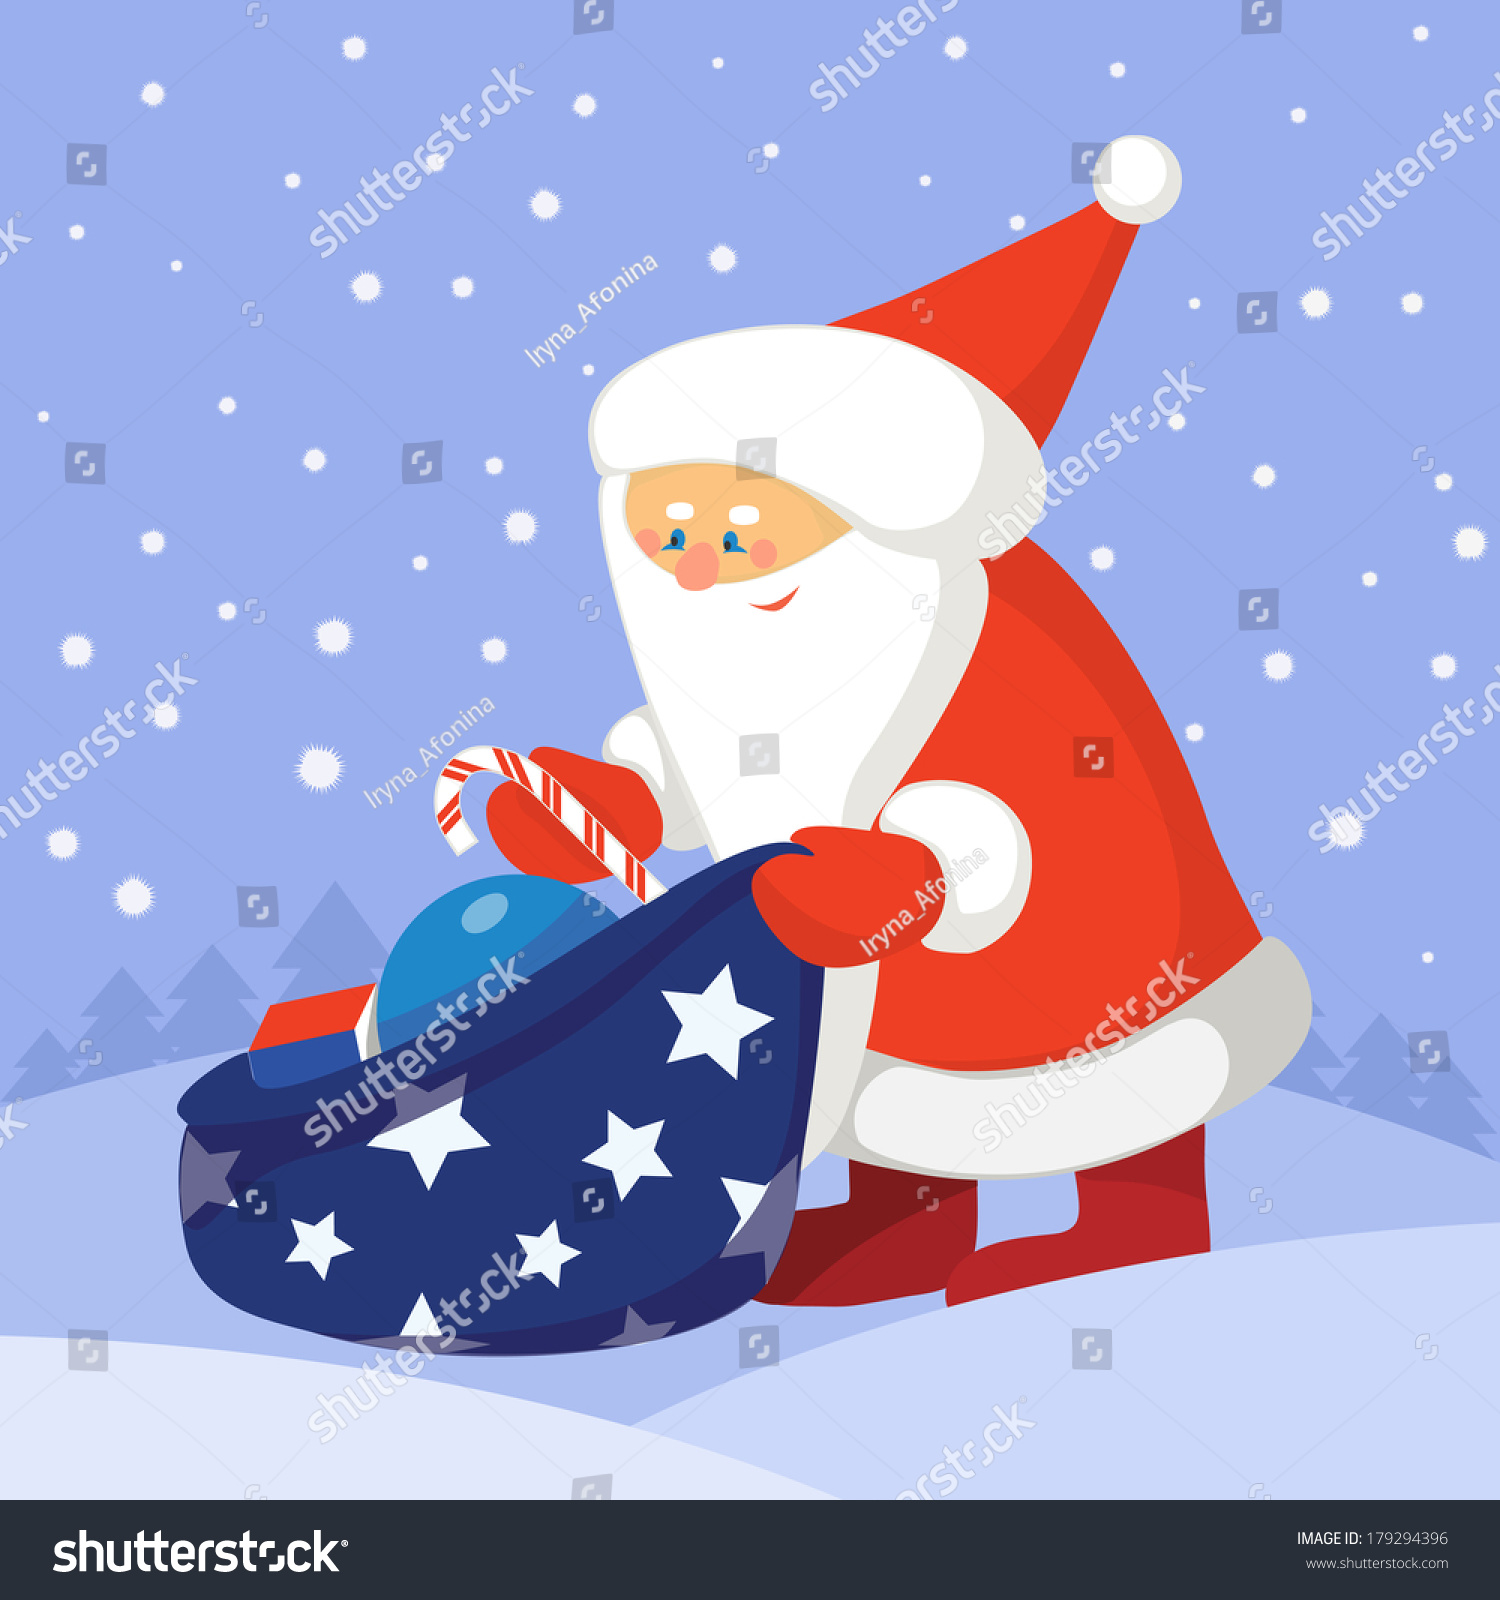 Santa Claus Putting Gifts In A Sack Stock Vector Illustration 179294396 ...